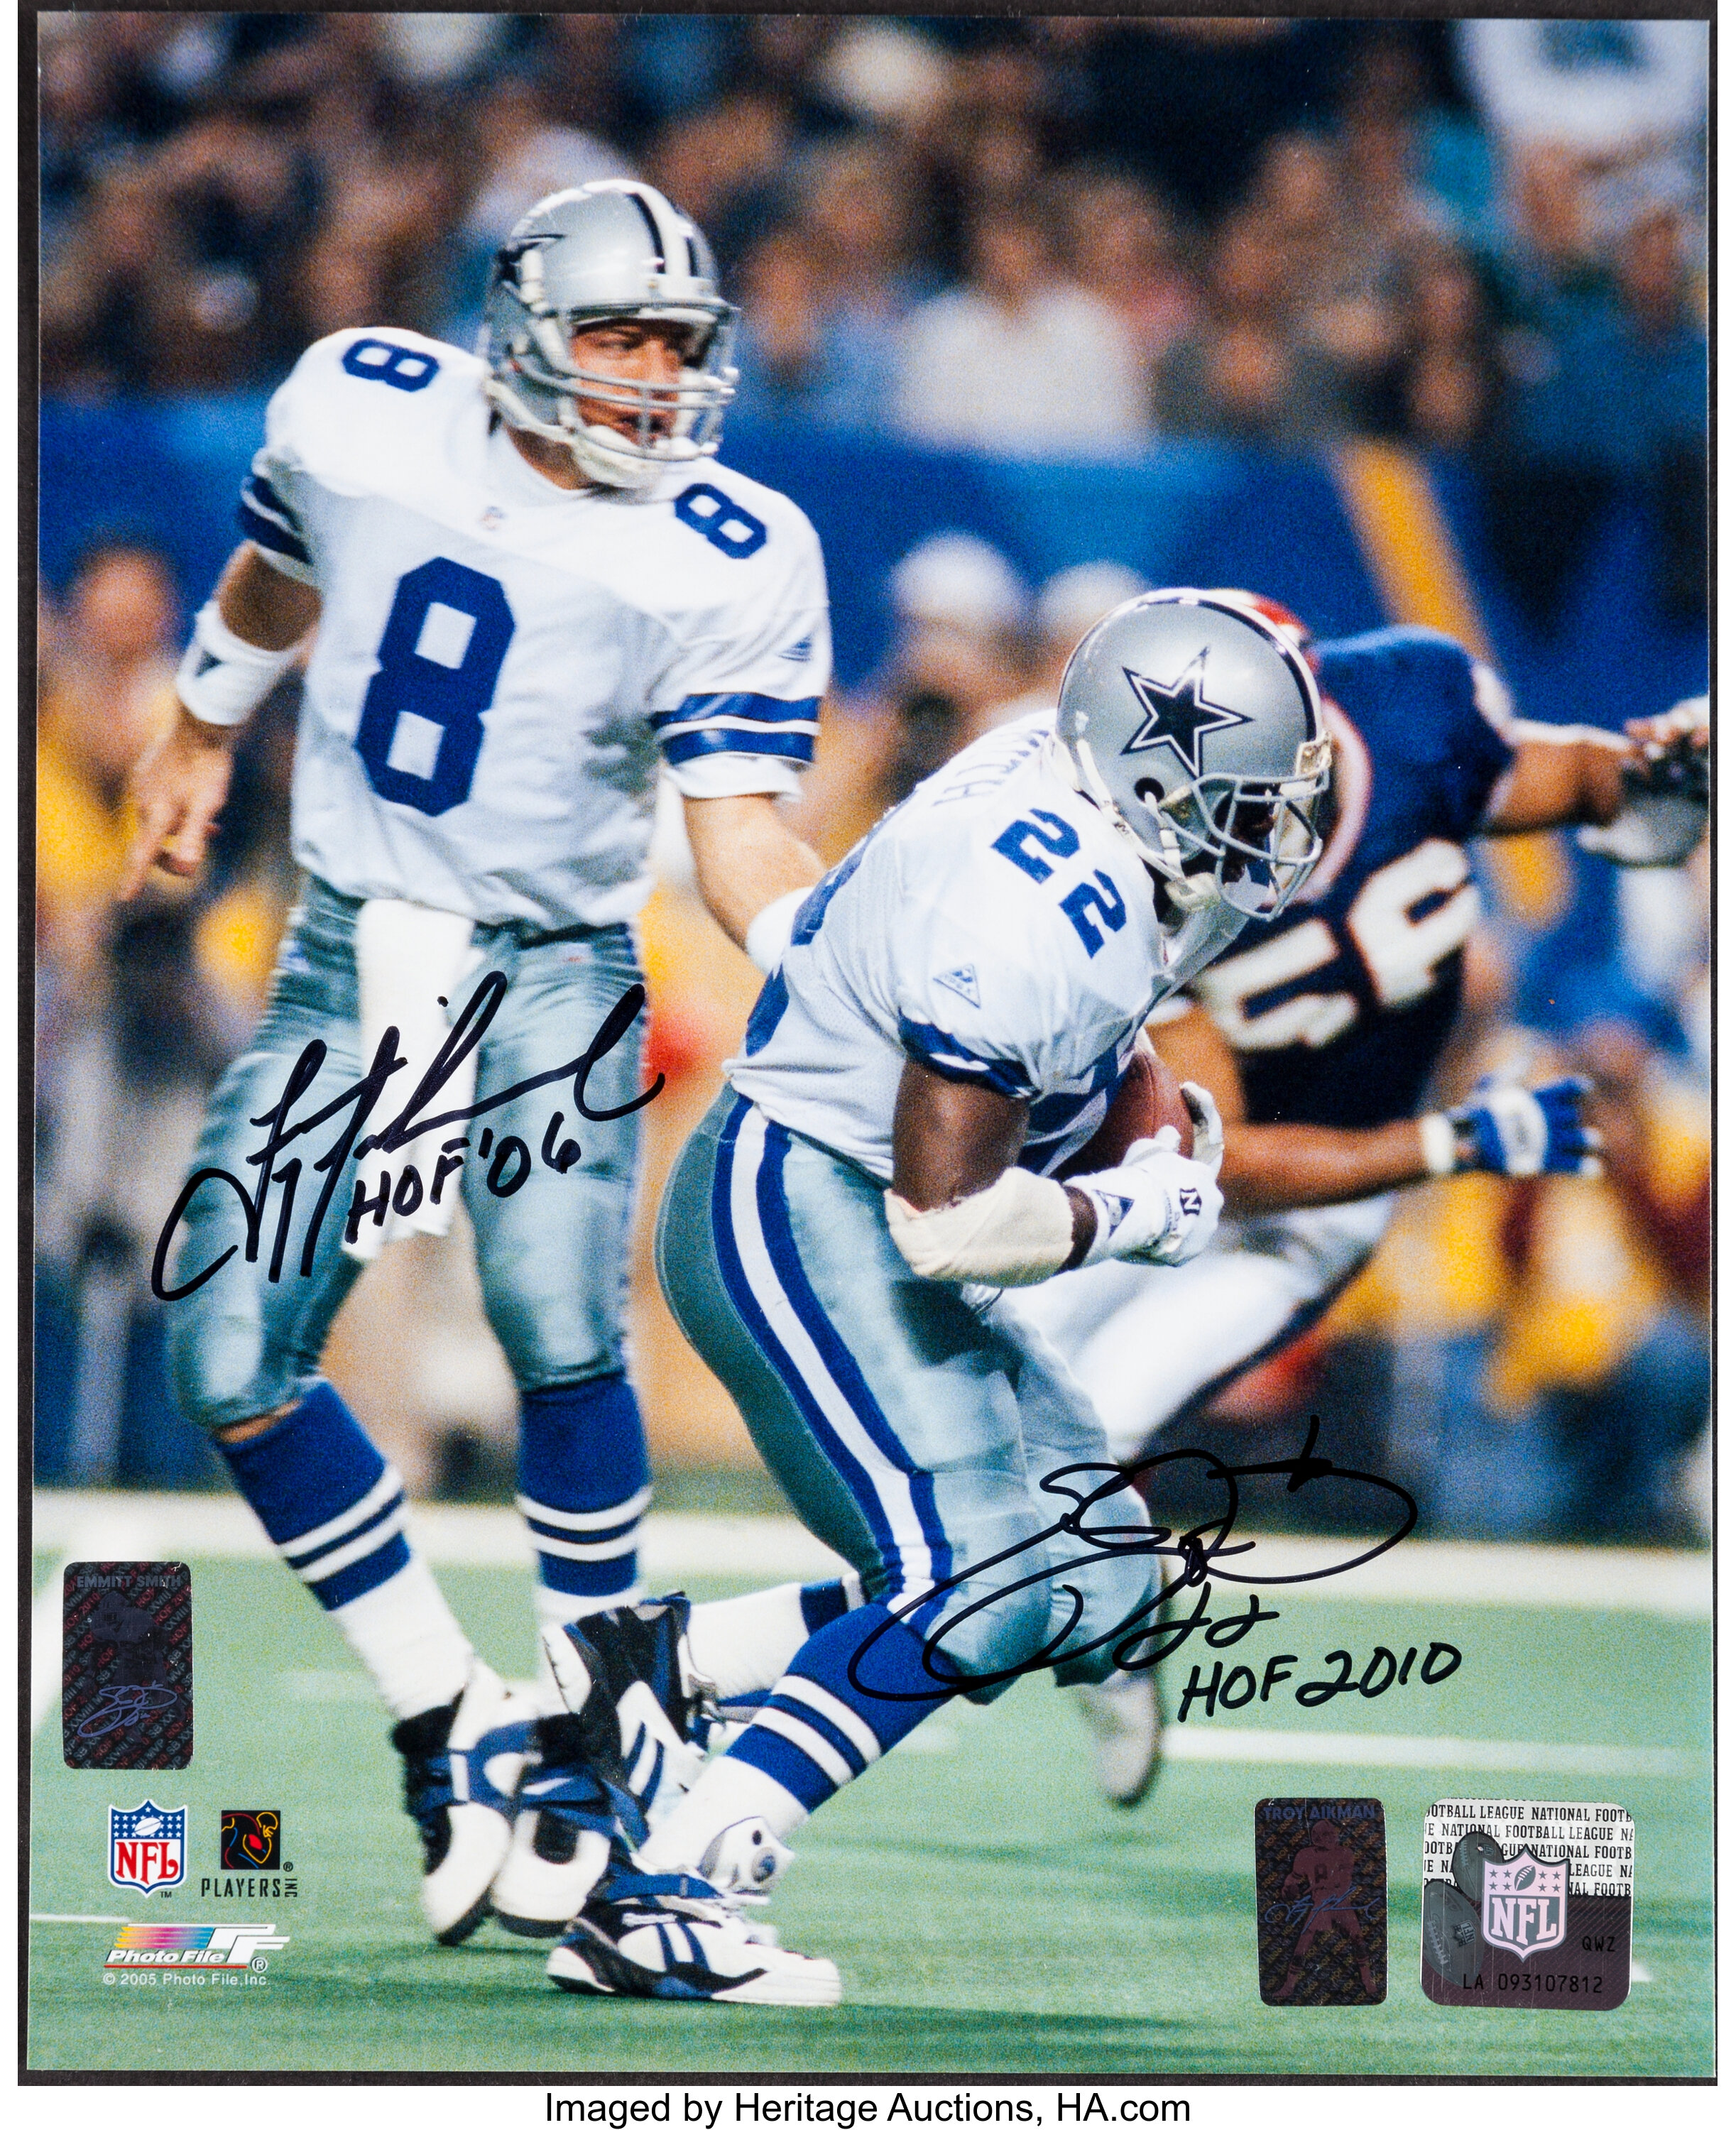 Troy Aikman and Emmitt Smith Dual Signed Photograph.... Football